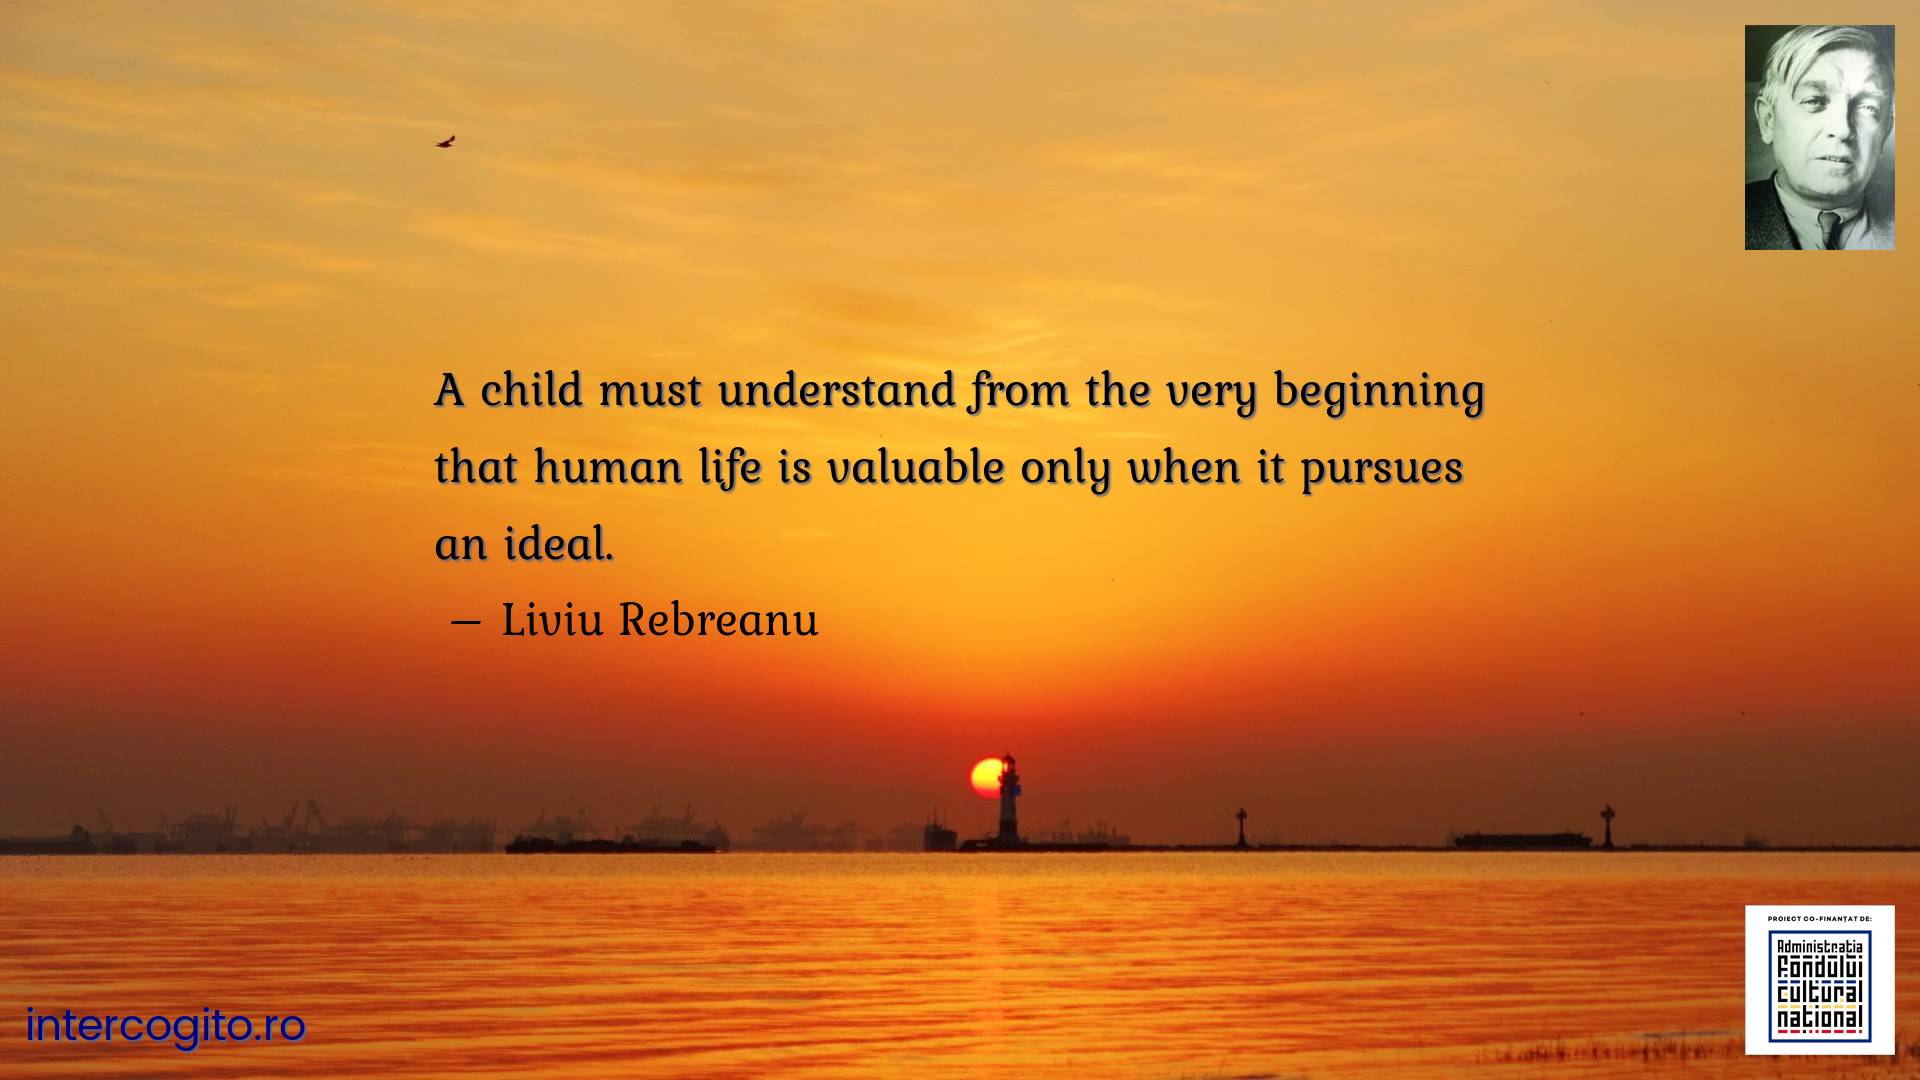 A child must understand from the very beginning that human life is valuable only when it pursues an ideal.